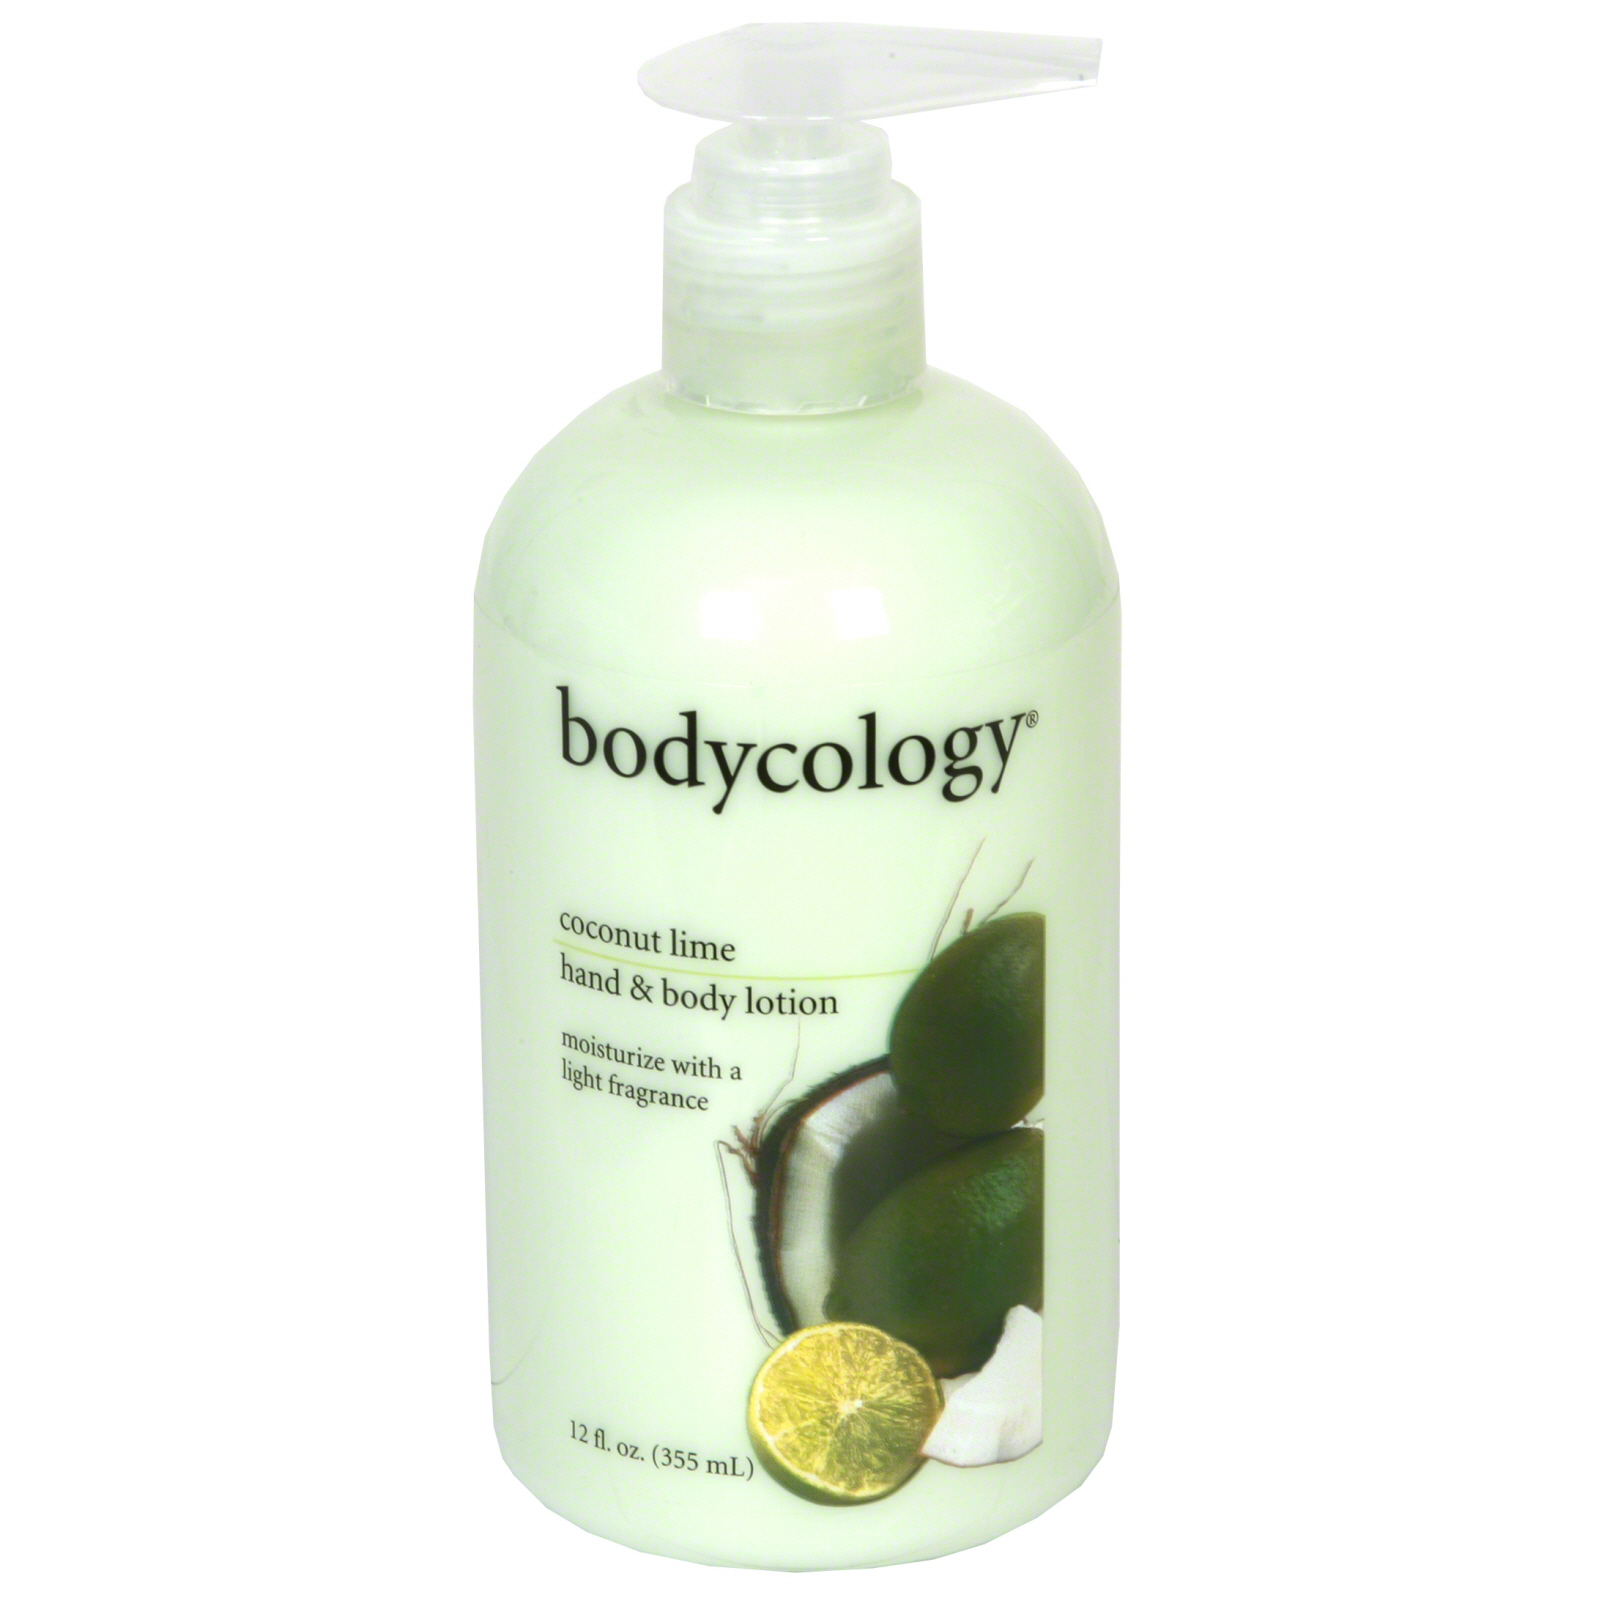 Bodycology Hand & Body Lotion, Coconut Lime, 12 fl oz (355 ml)